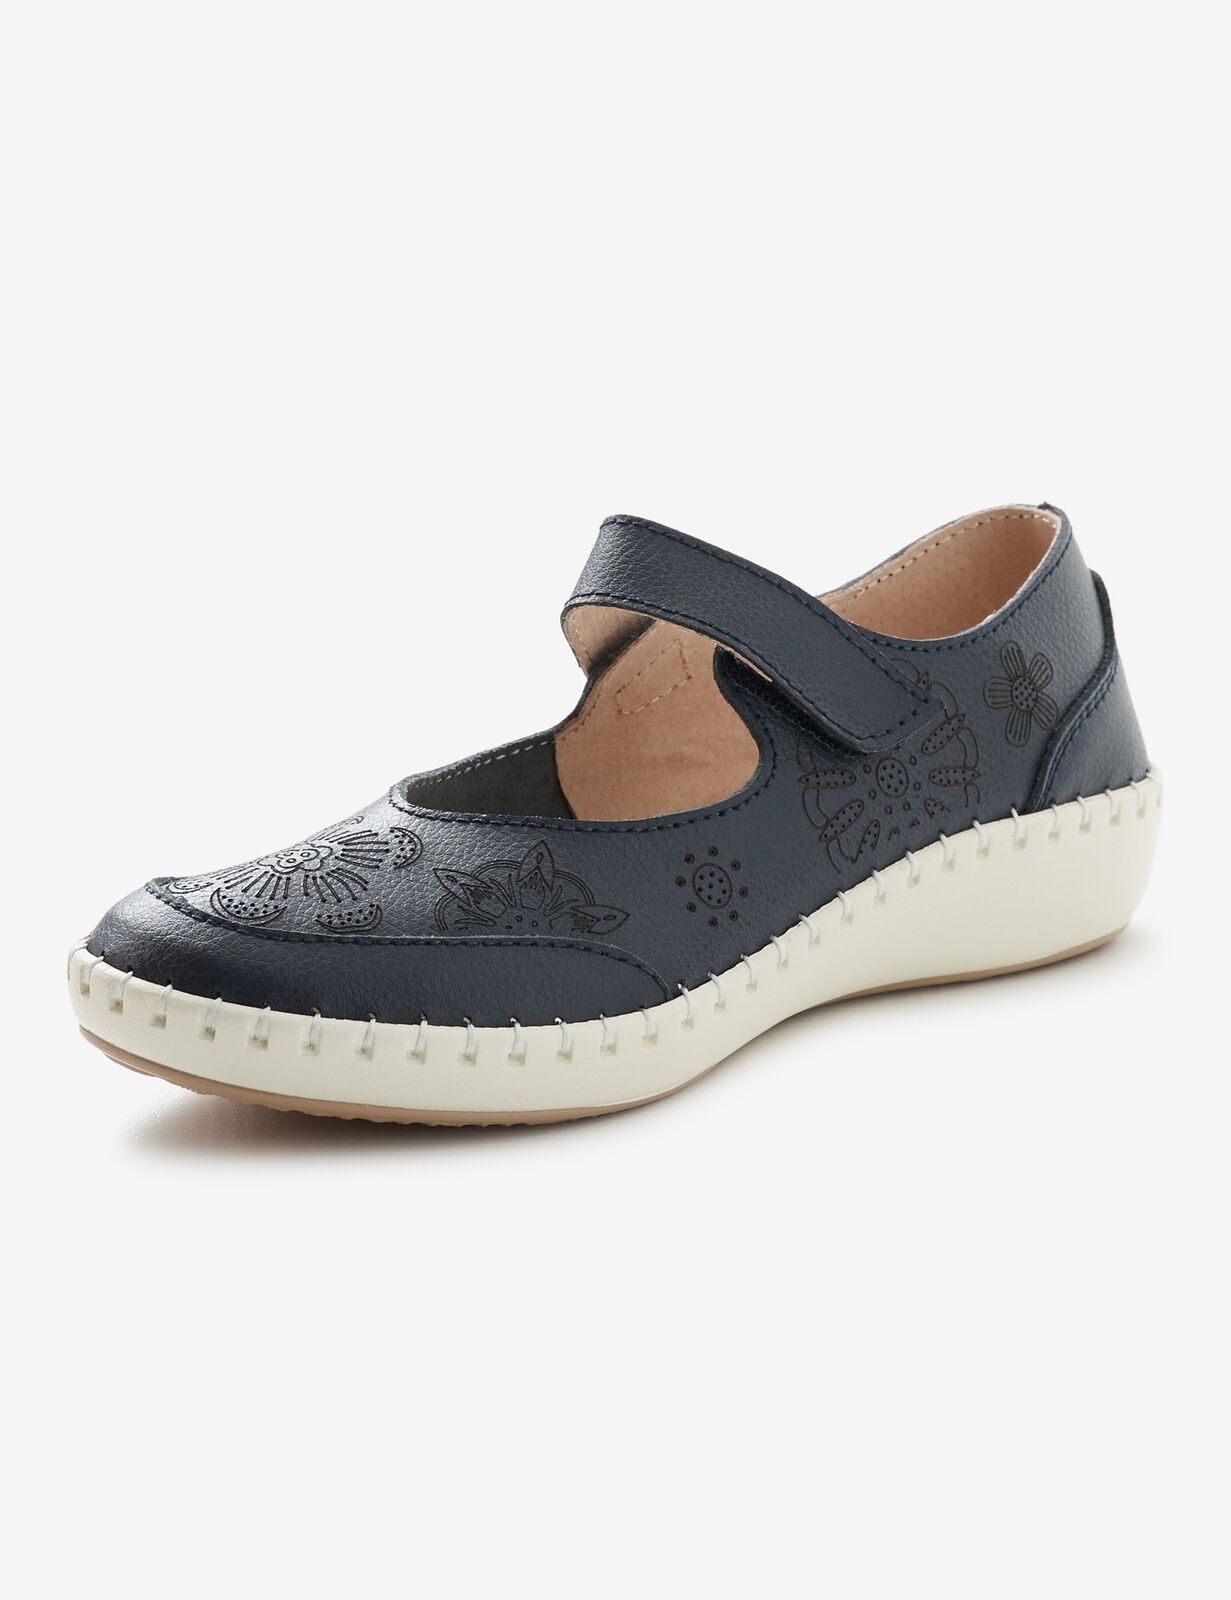 RIVERS - Womens Winter Casual Shoes - Blue Mary Jane - Slip On Leather Footwear